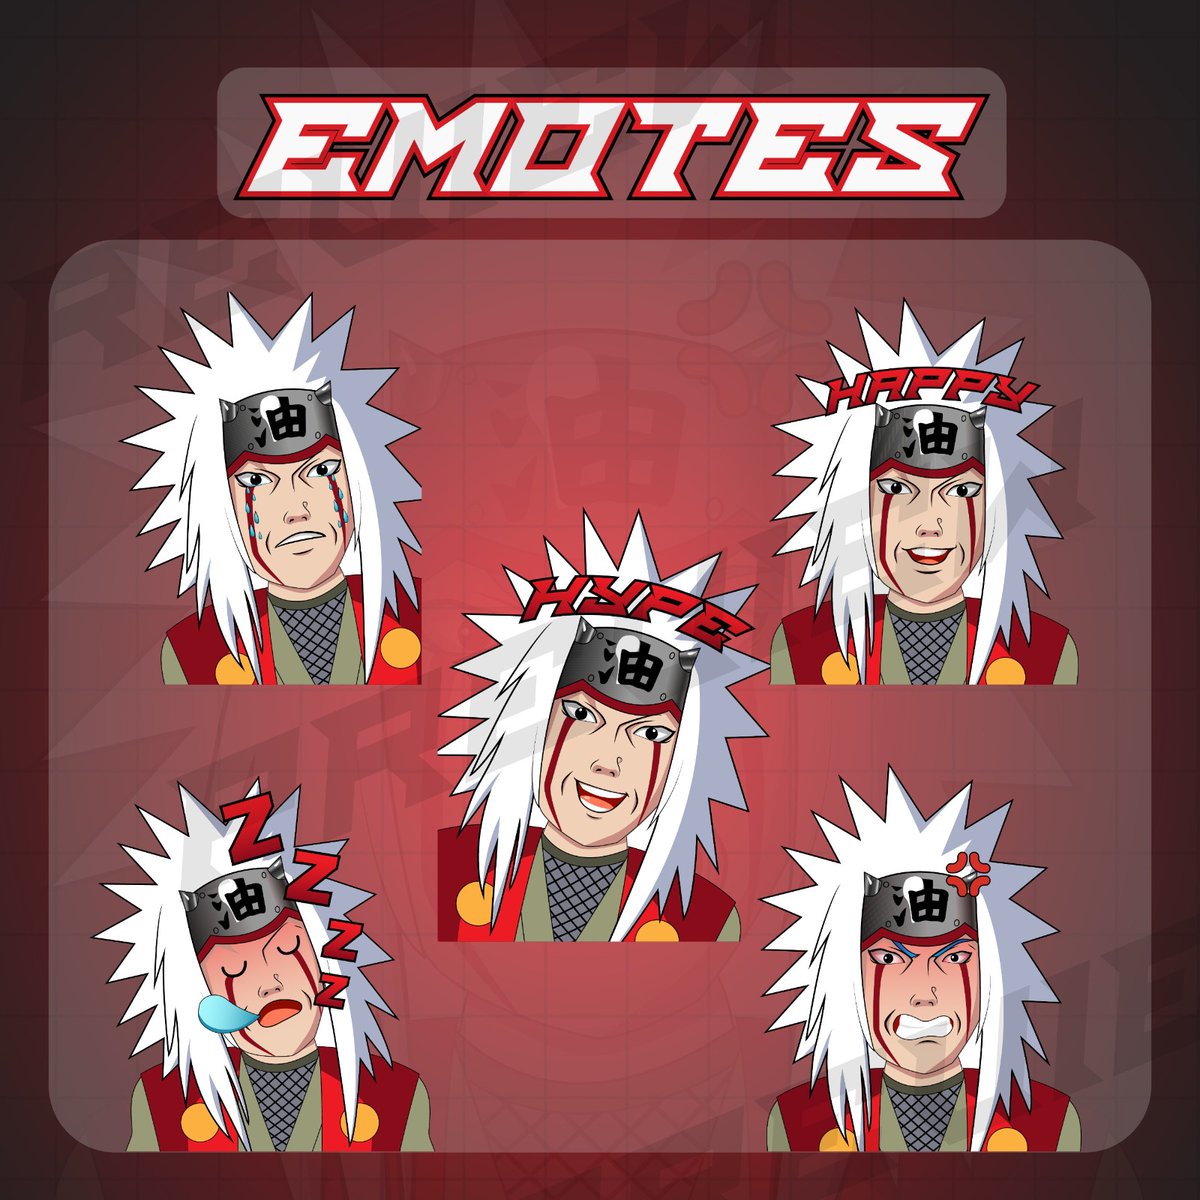 New emotes alert! 🚀Dive into the world of expressions and let these emotes tell a story. Which one resonates with you? #EmoteCreation #GraphicDesign #VTuber #Fashion #YouTuber #Artist #Support #TwitchStreamers #GraphicDesigner #VTuberArt #TwitchGraphics  Reference image from web